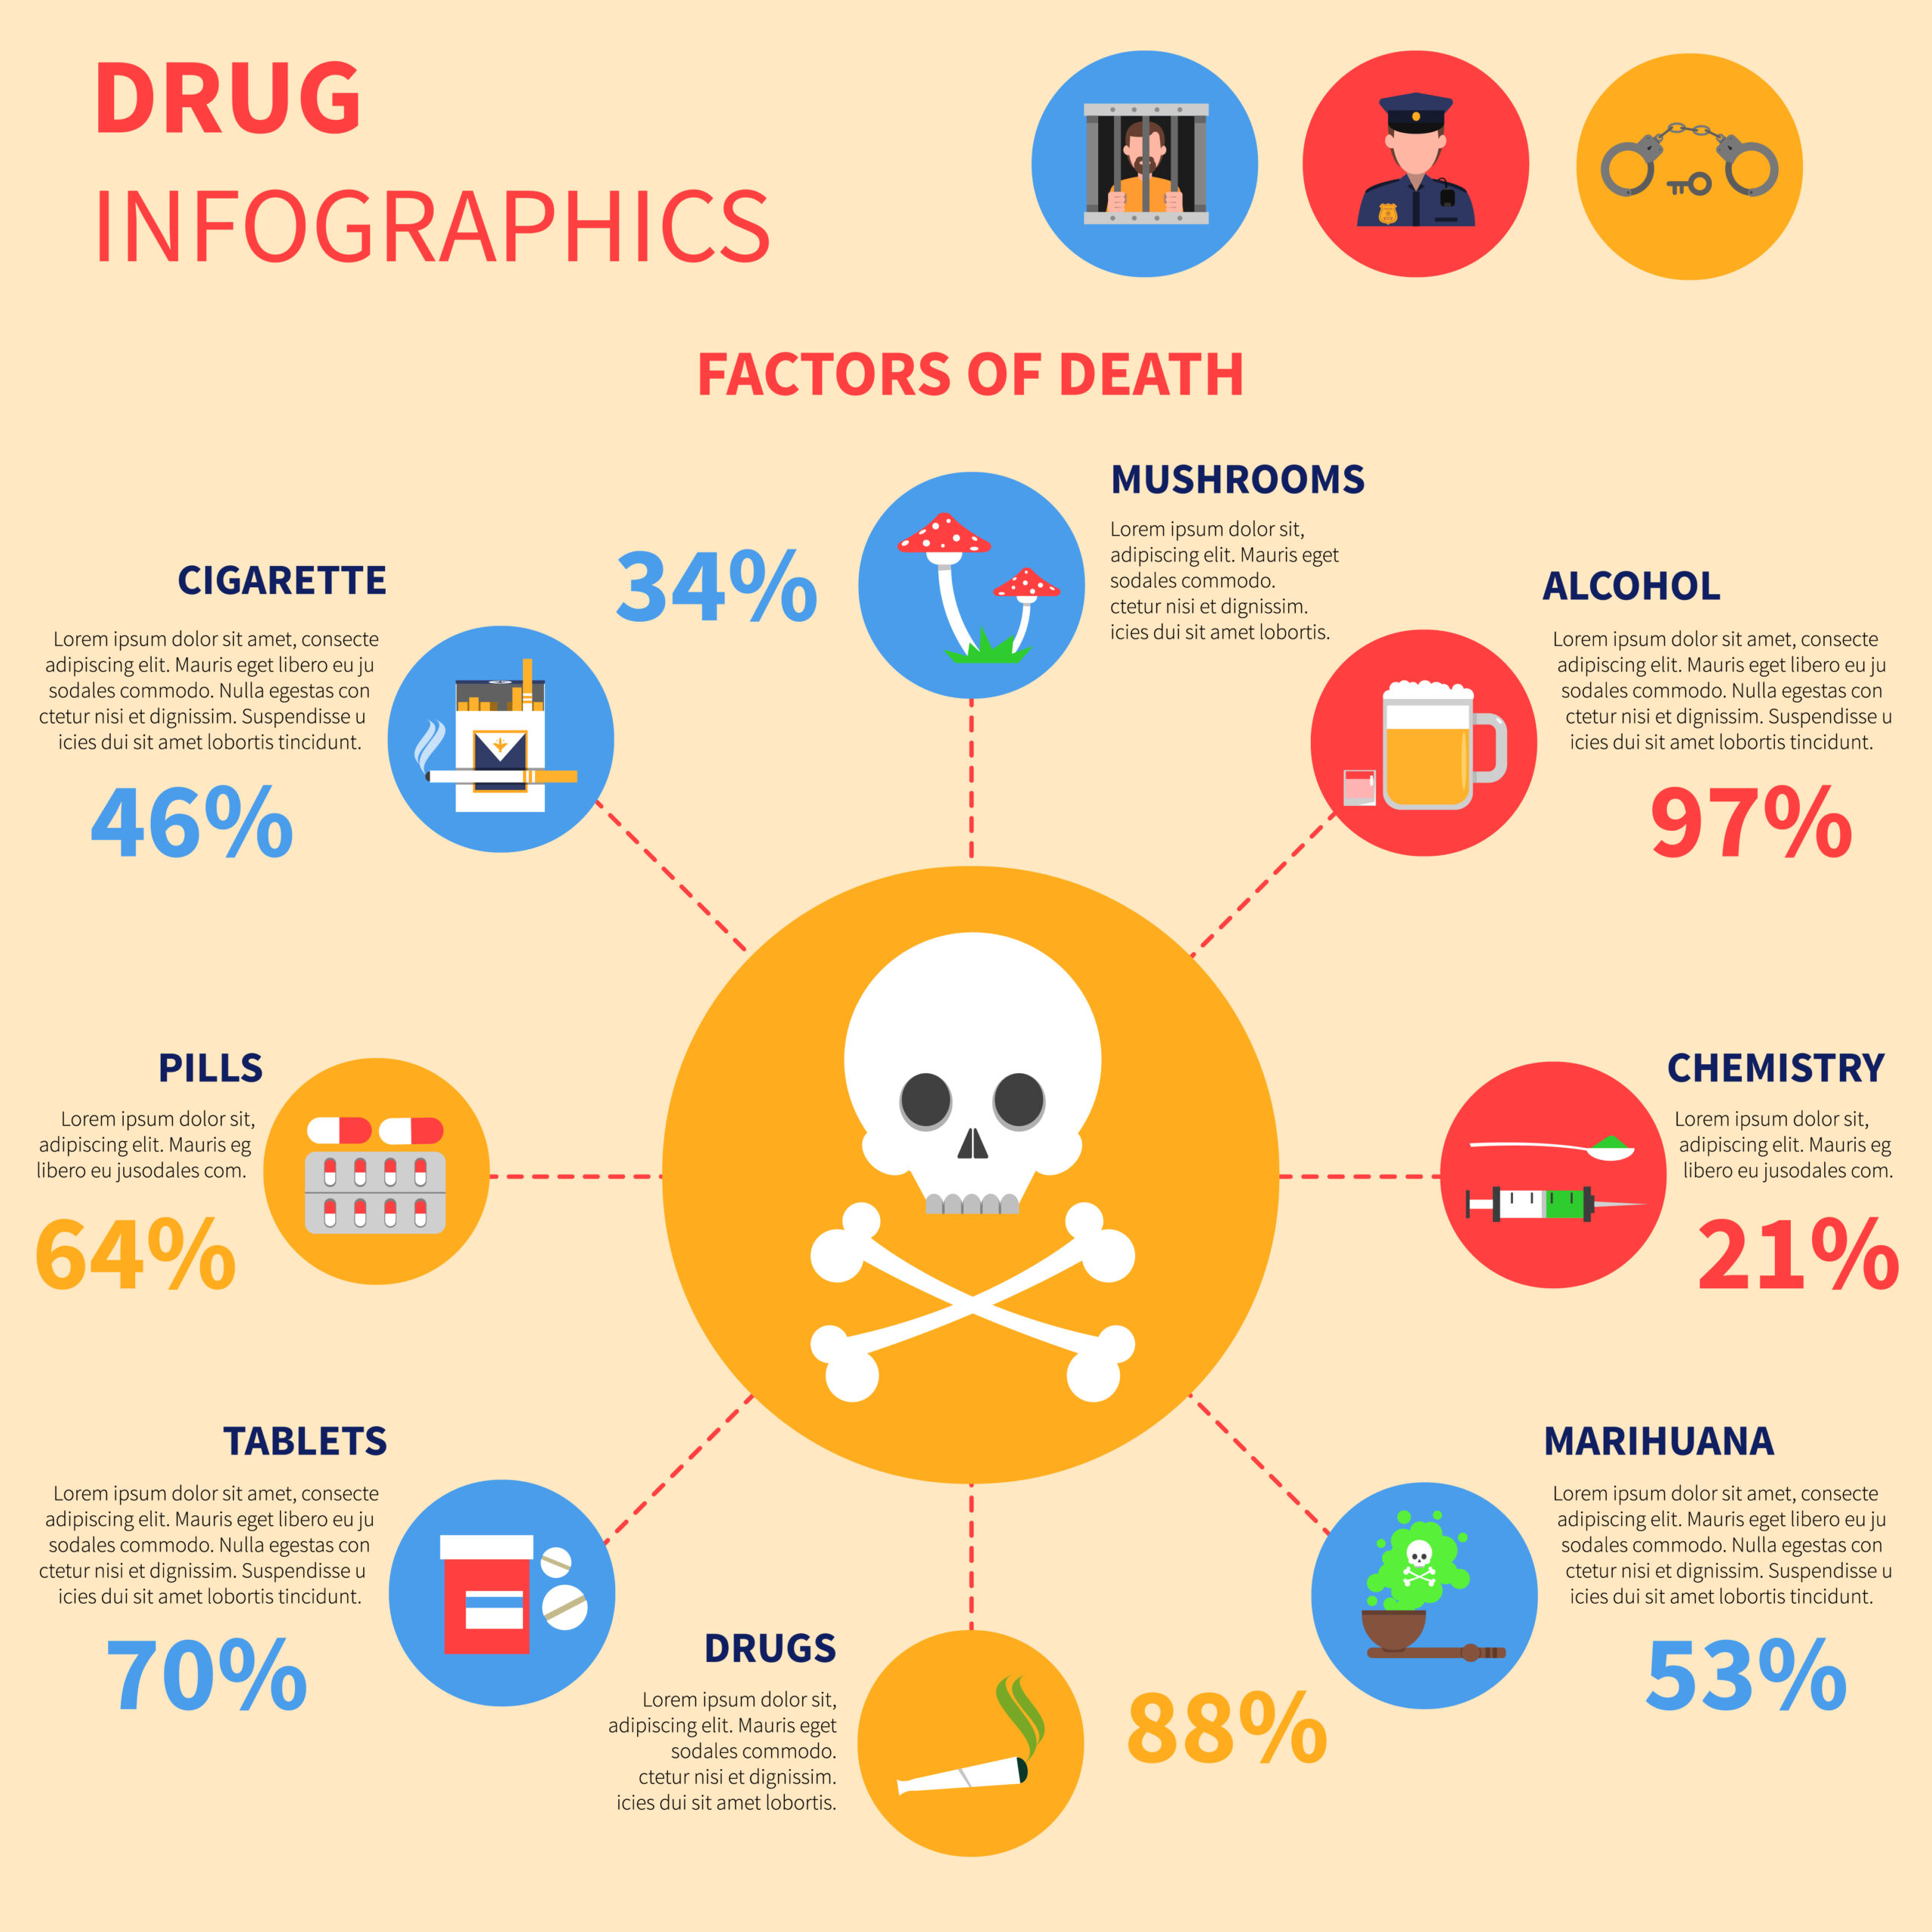 picture of an infographic on drugs